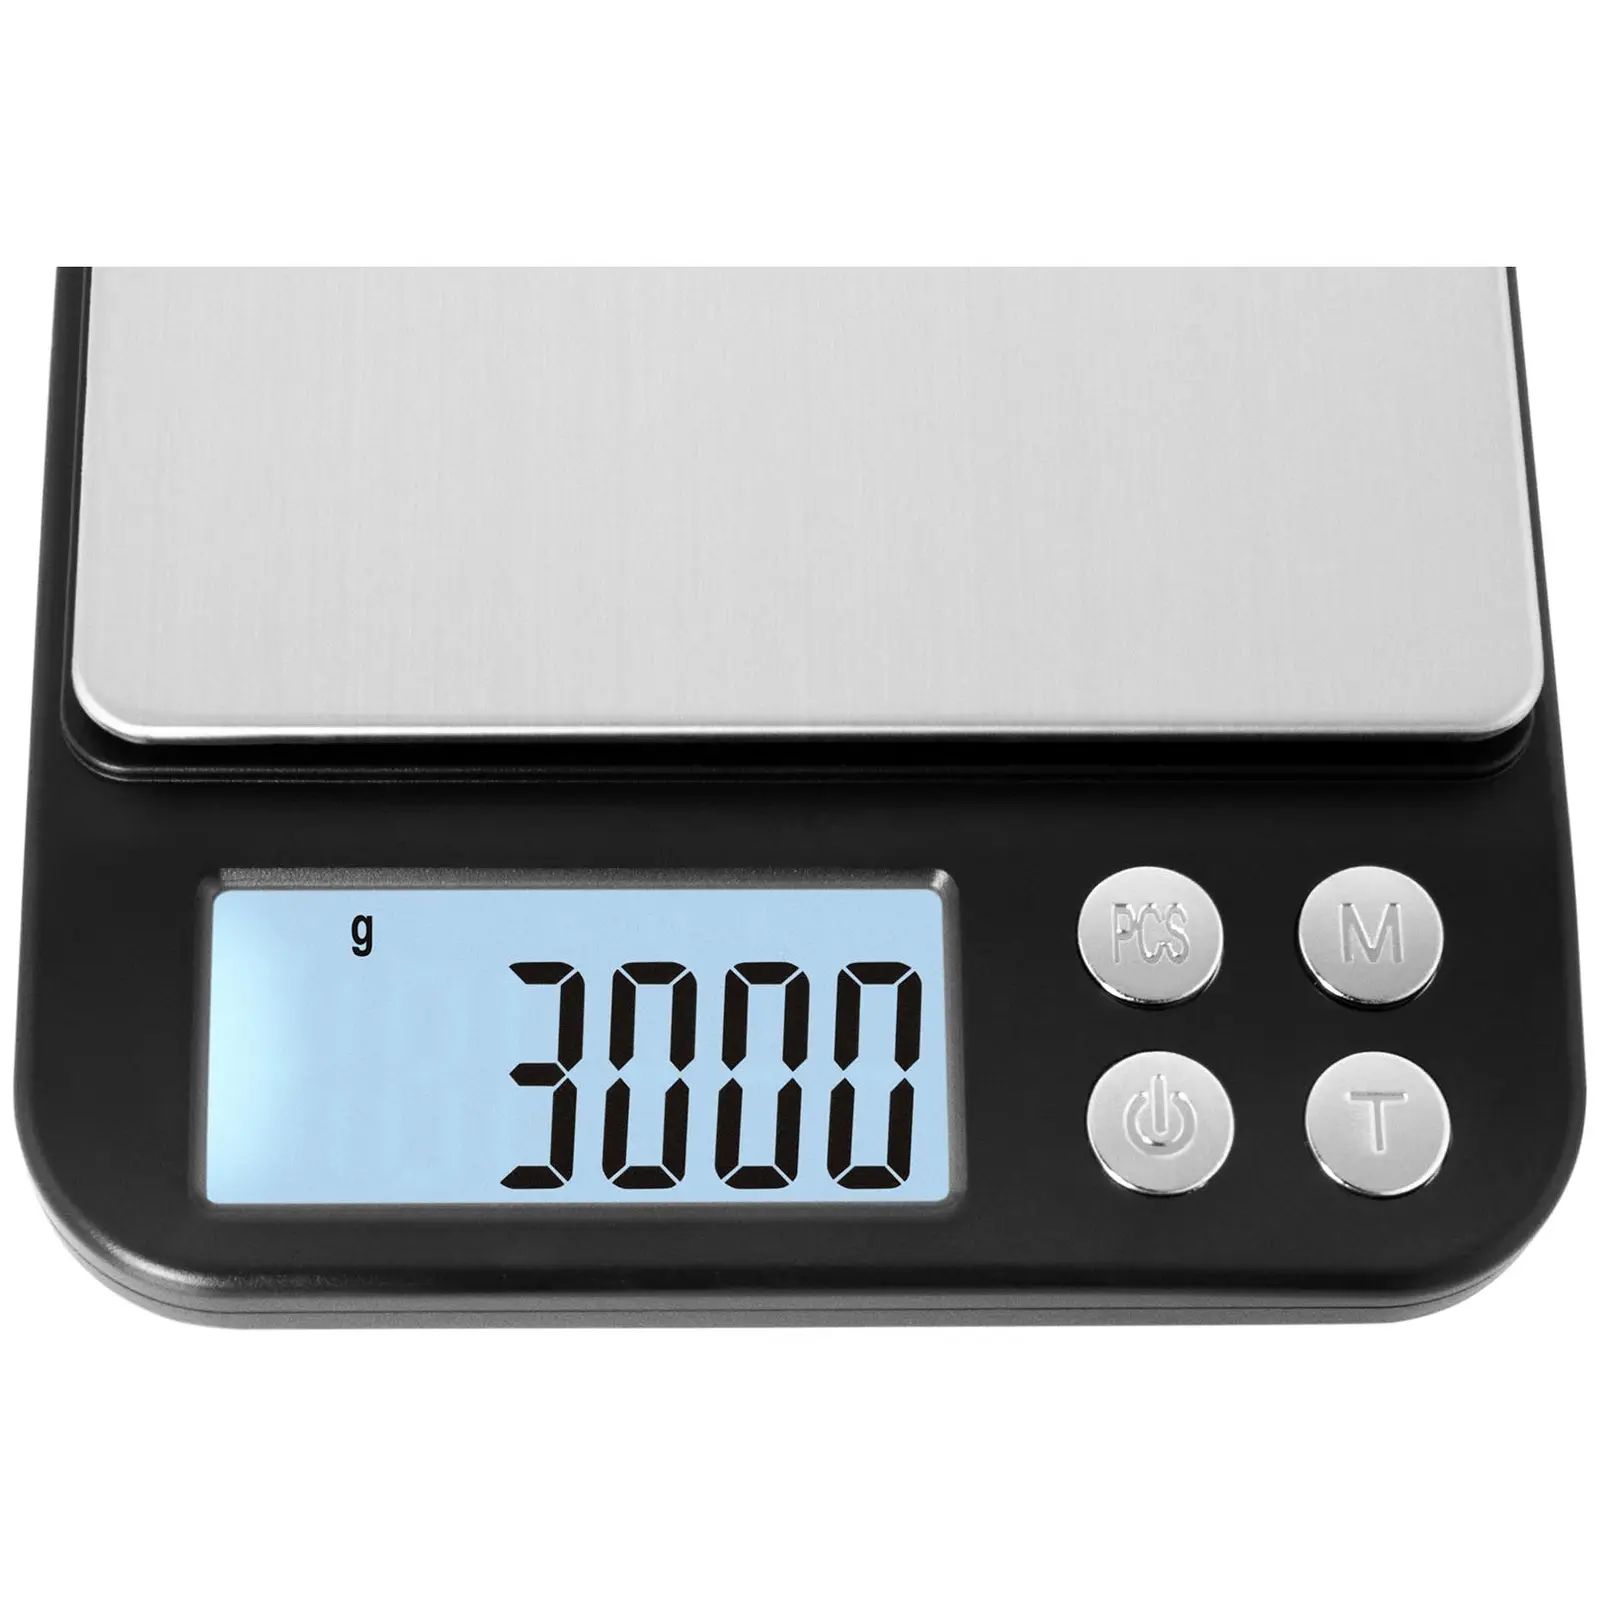 Table Scale - 3 kg / 0.1 g